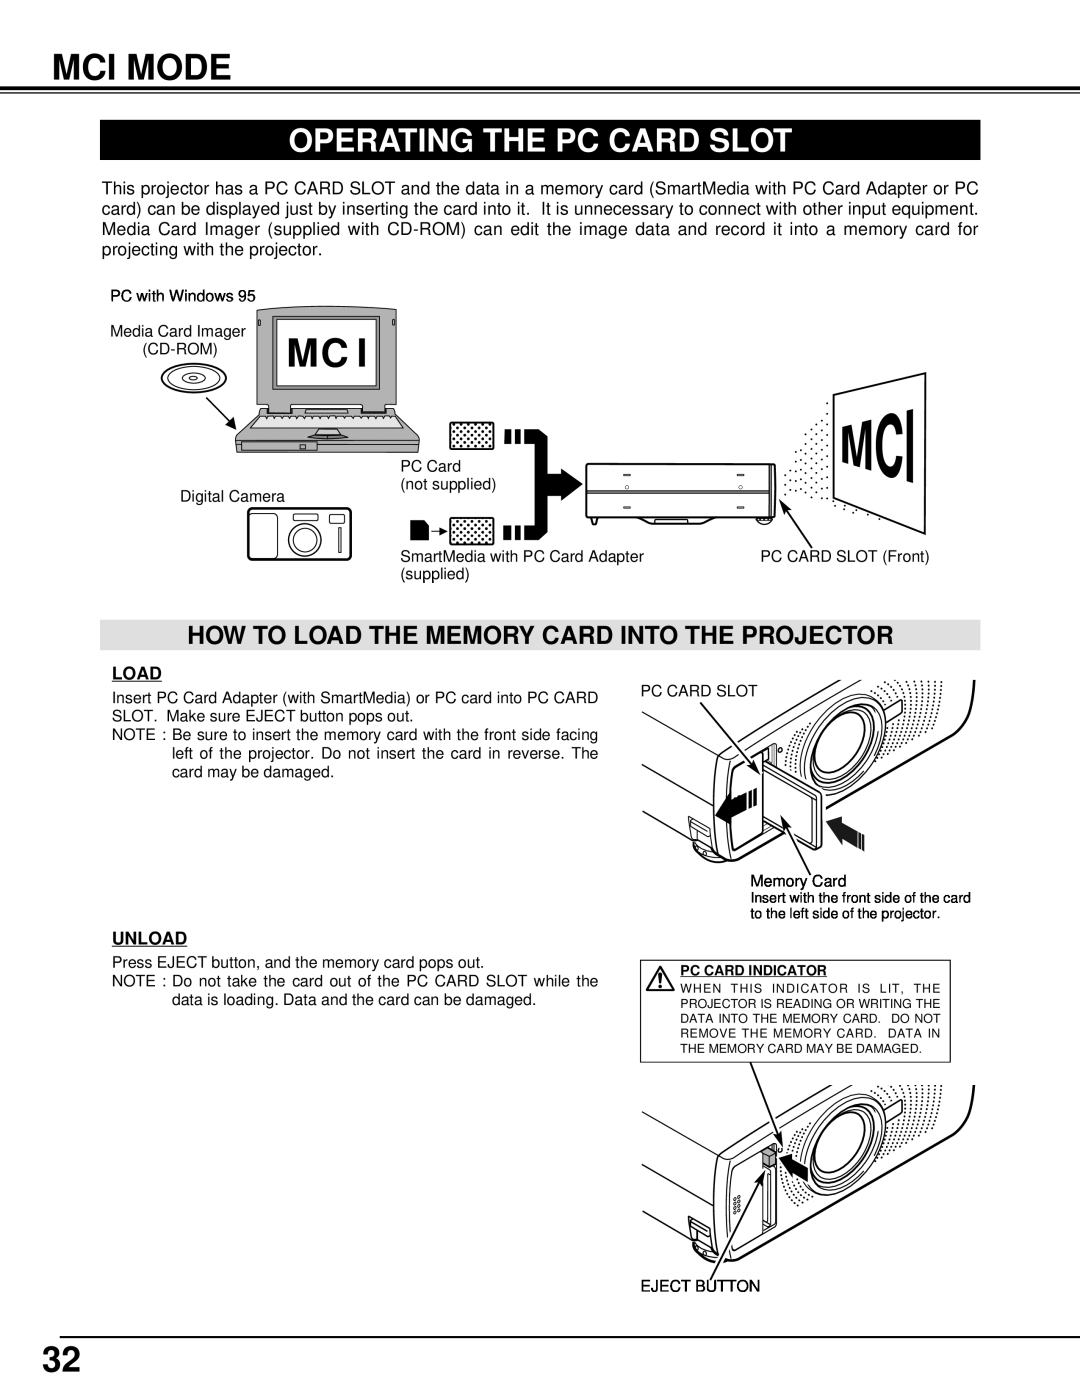 BOXLIGHT CP-33t manual Mci Mode, Operating The Pc Card Slot, How To Load The Memory Card Into The Projector 